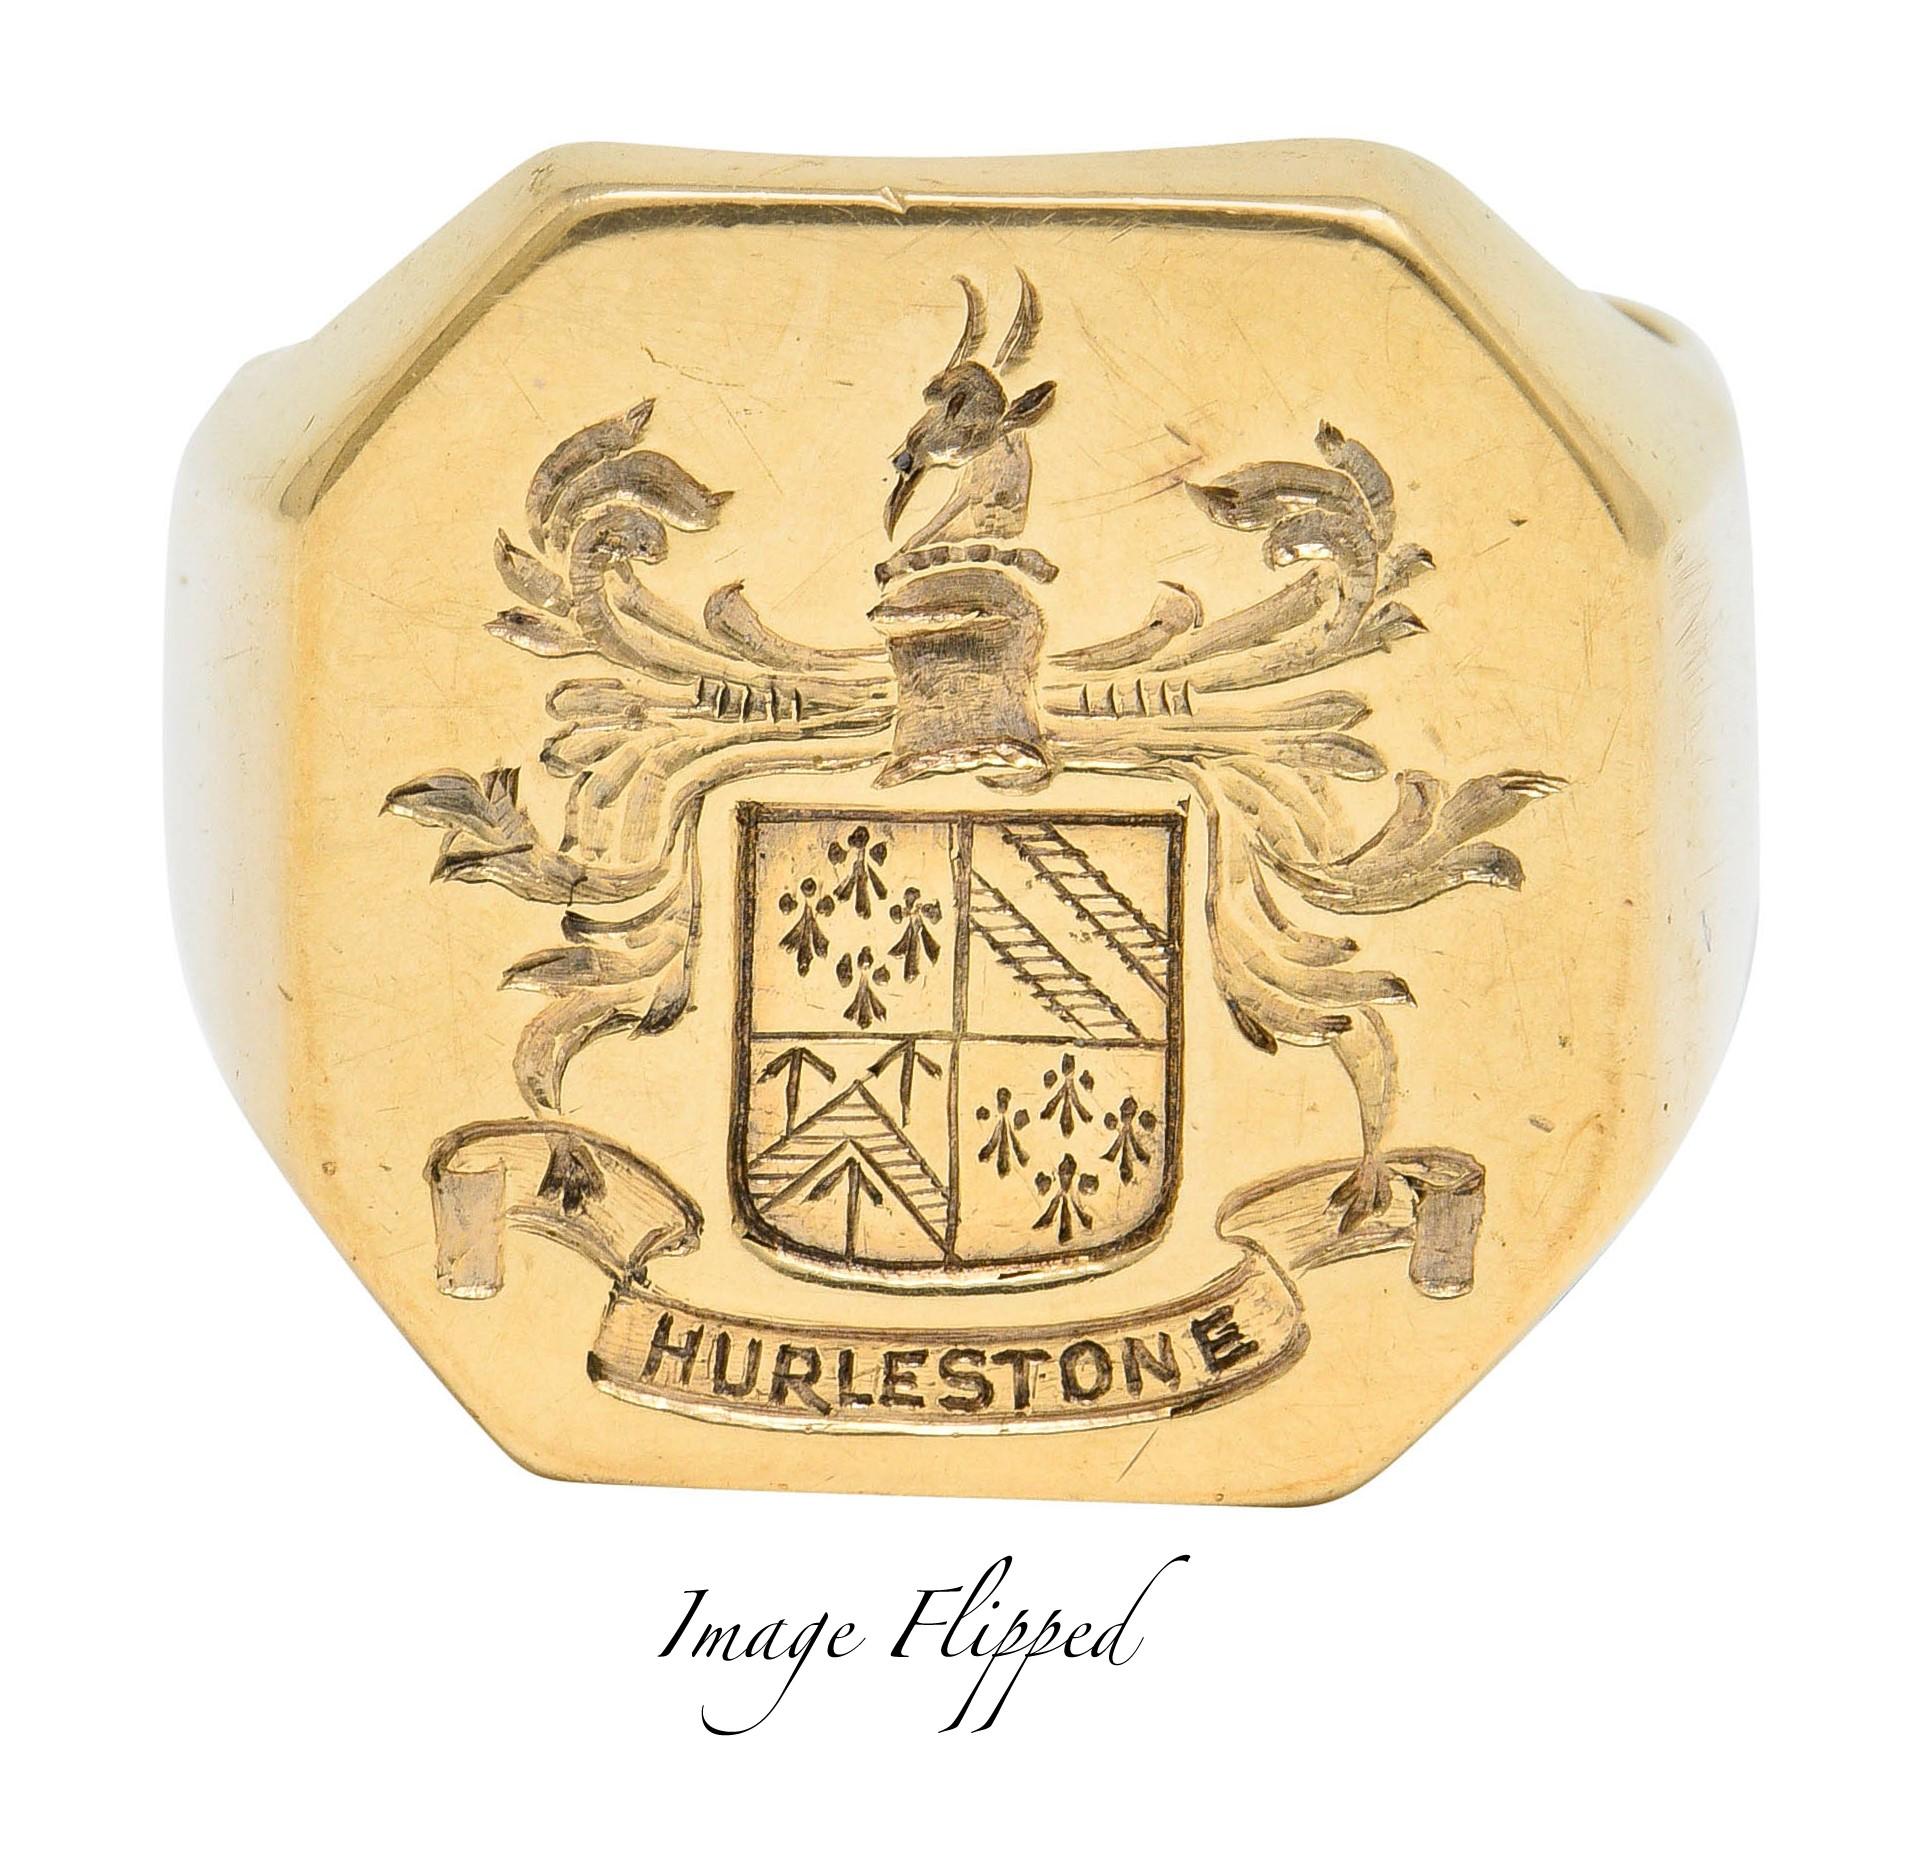 Signet style ring with an octagonal shaped face

Deeply engraved to depict a quadrisected shield surrounded by scrolling foliate

Topped by a stylized goat bust and with a scrolled banner inscribed 'HURLESTONE' in reverse

Stamped 14K for 14 karat